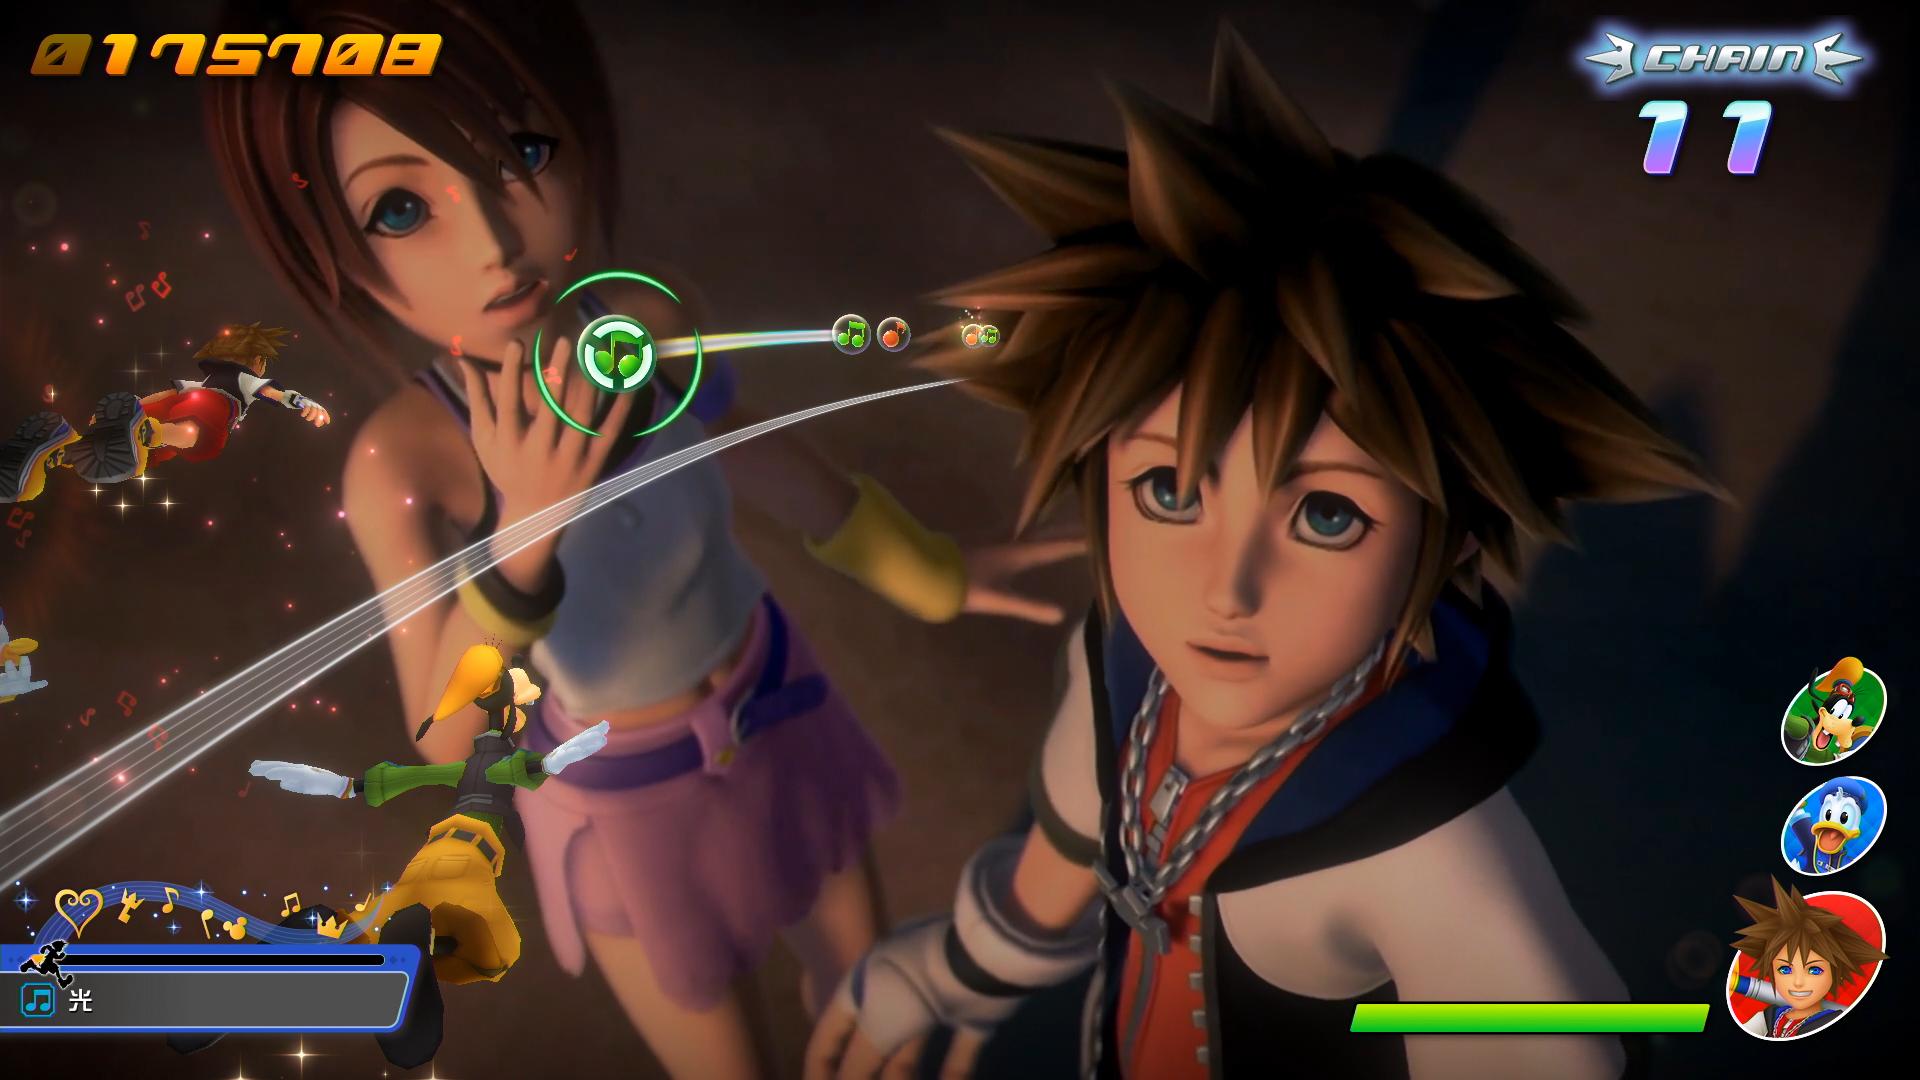 Game Informer - With Kingdom Hearts 4 recently announced, Sora is